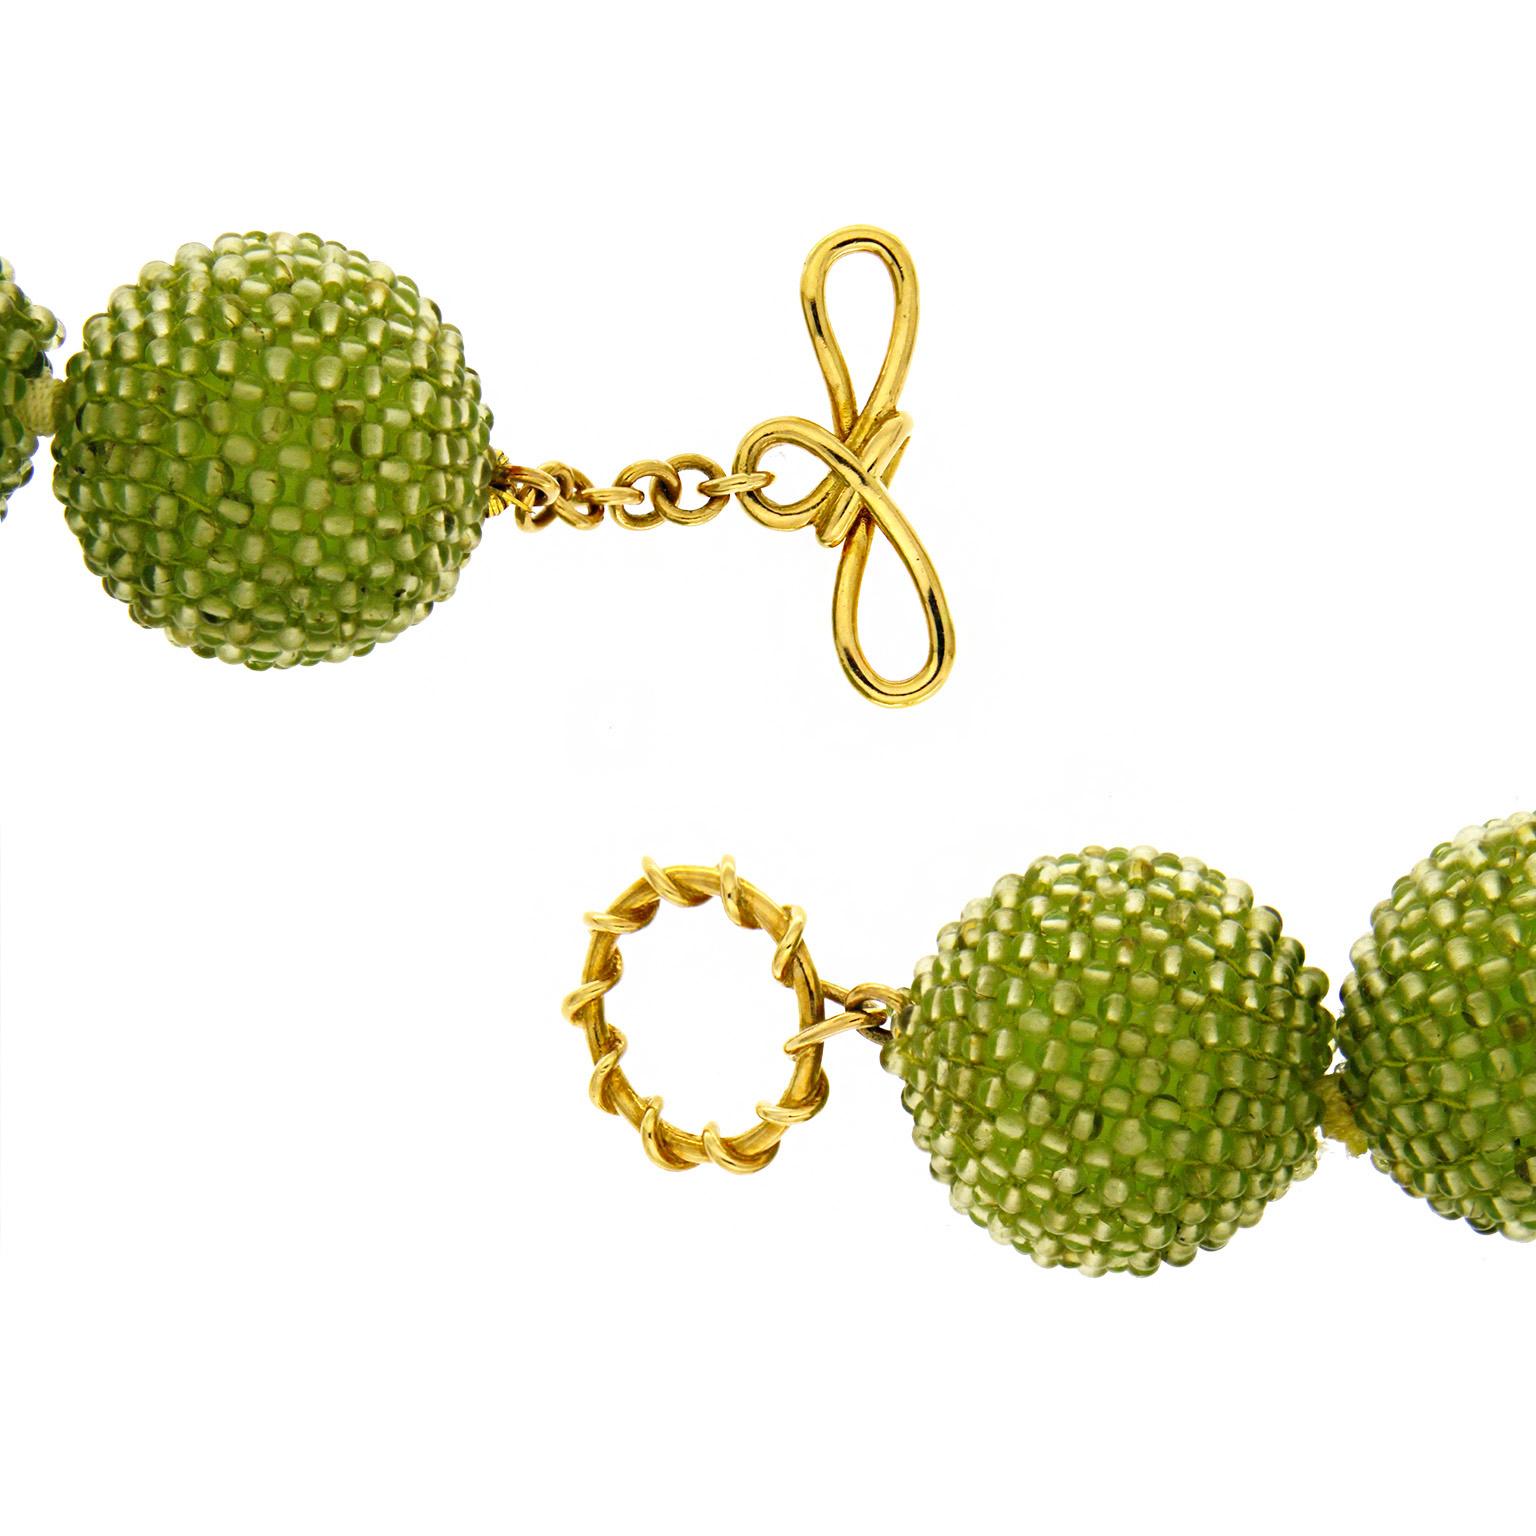 Bead Valentin Magro Large Peridot Gold Woven Ball Necklace